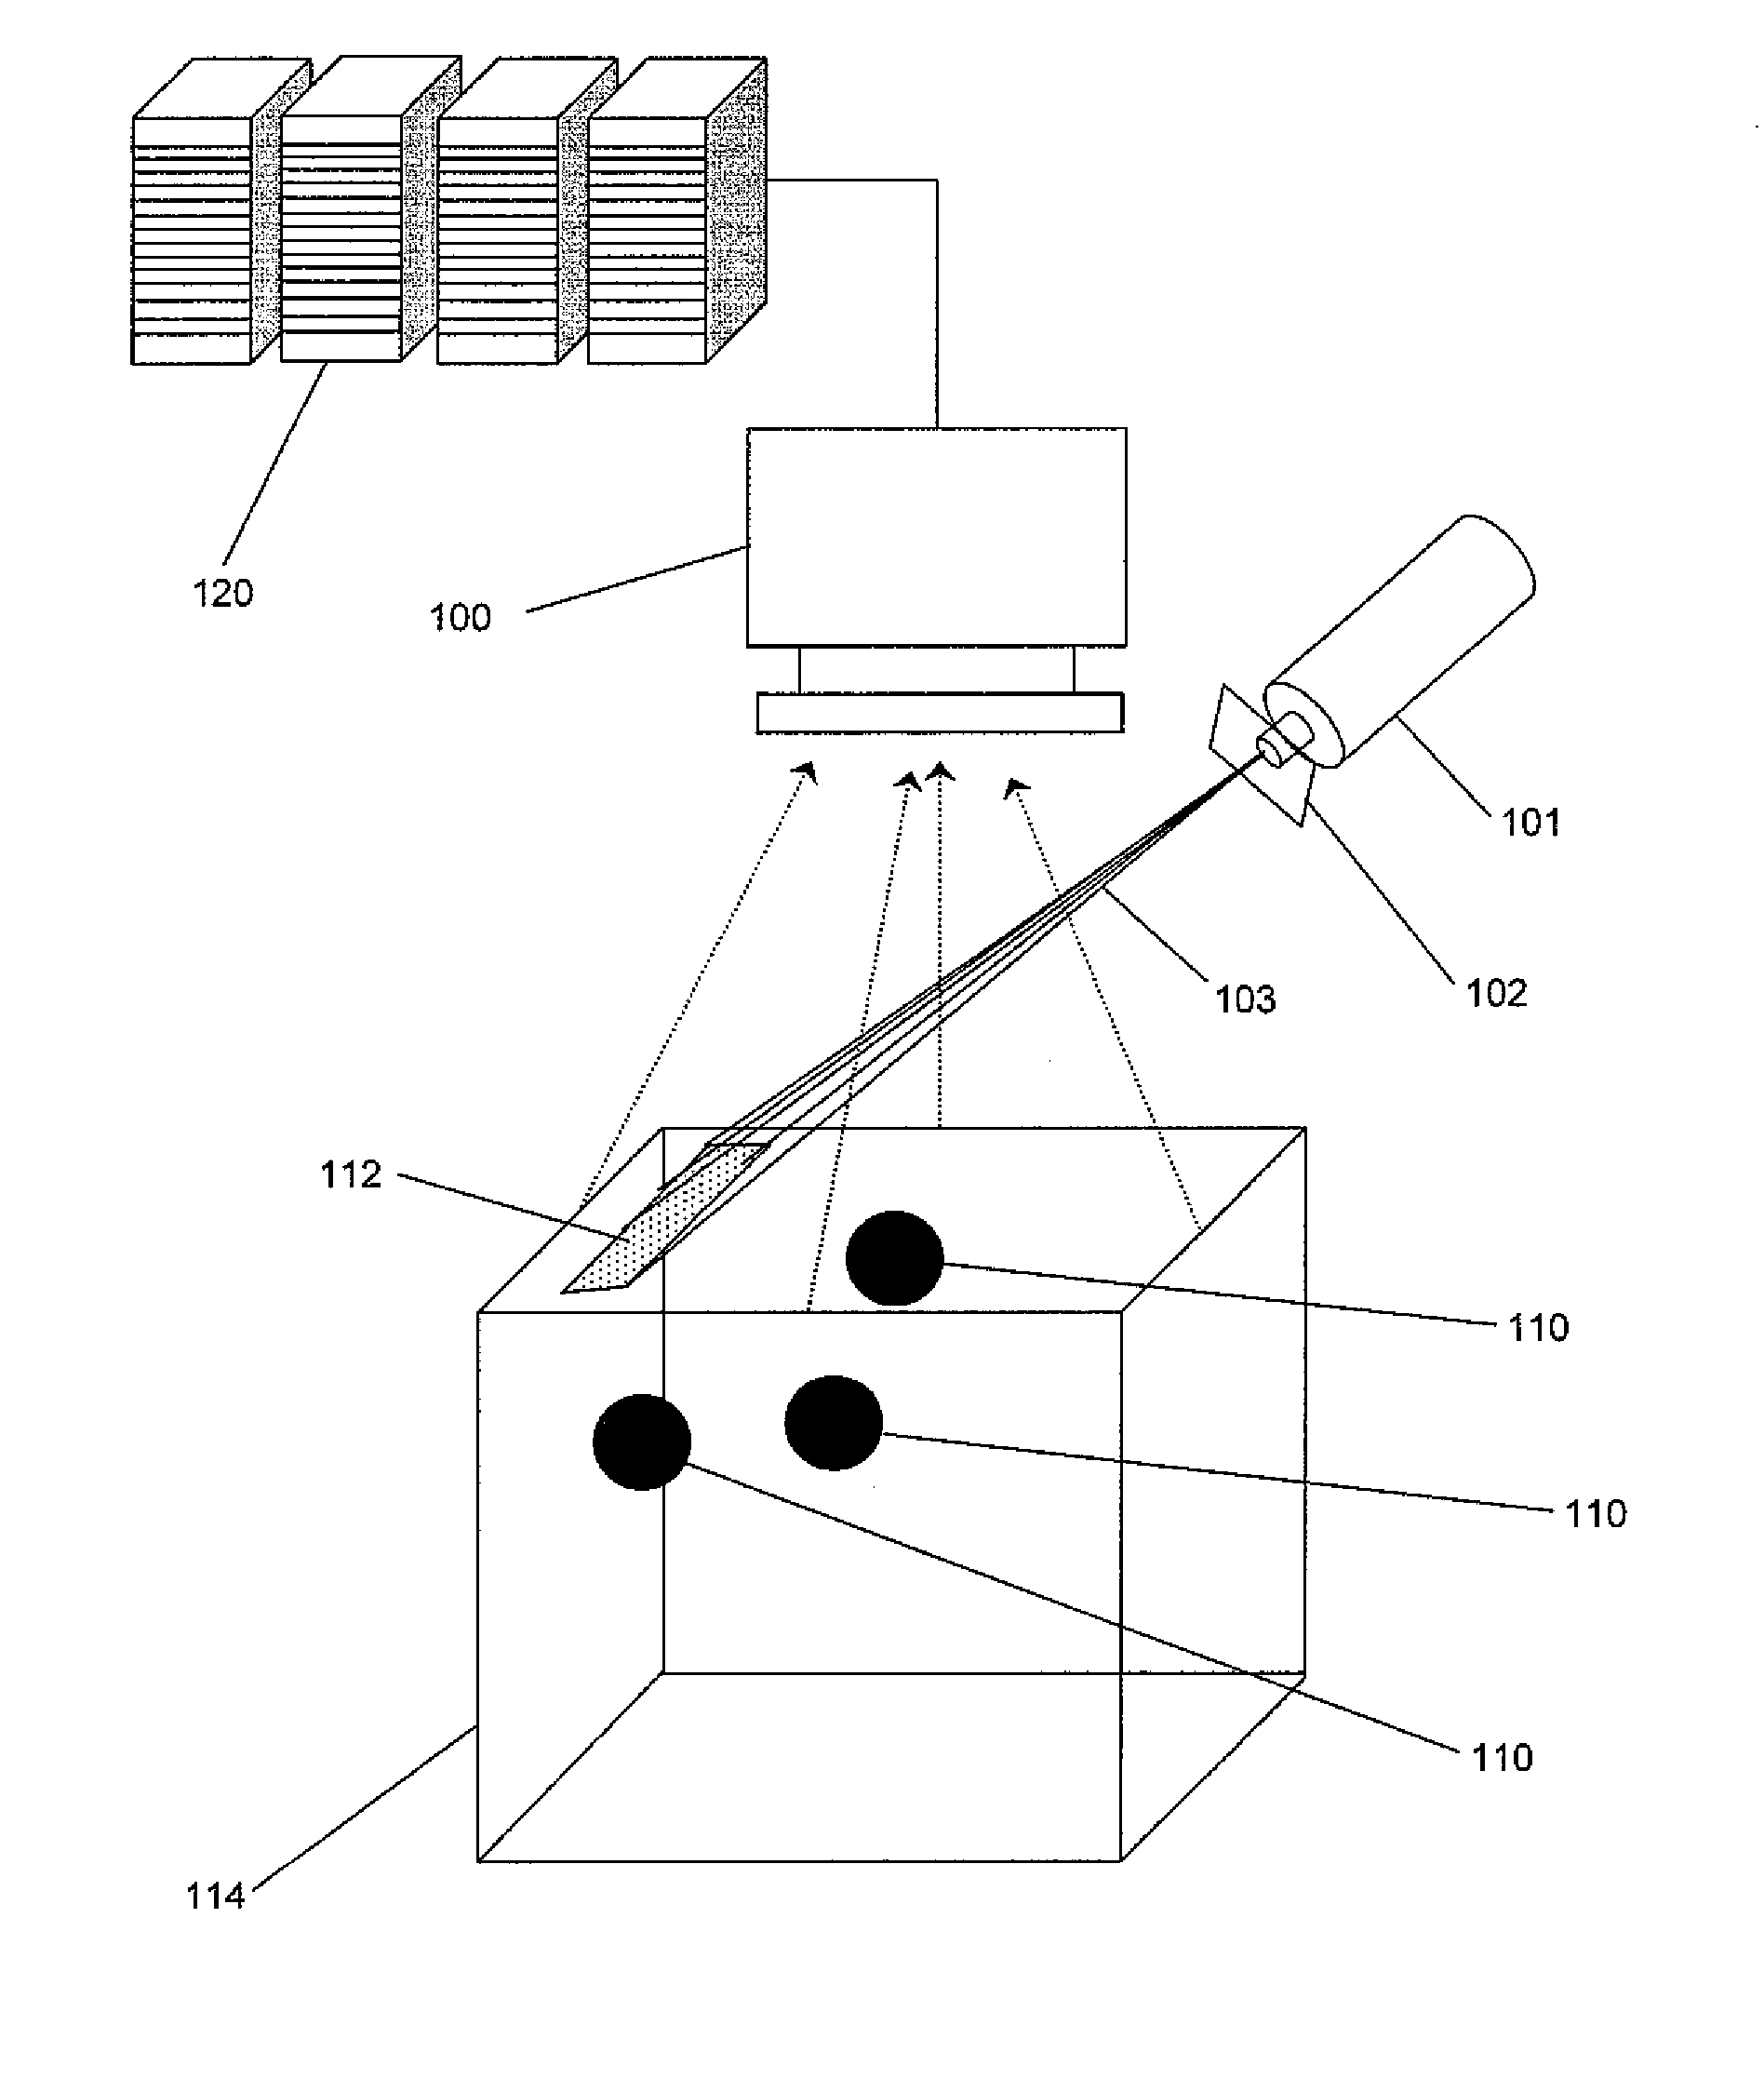 Method and System for Non-Contact Fluorescence Optical Tomography with Patterned Illumination